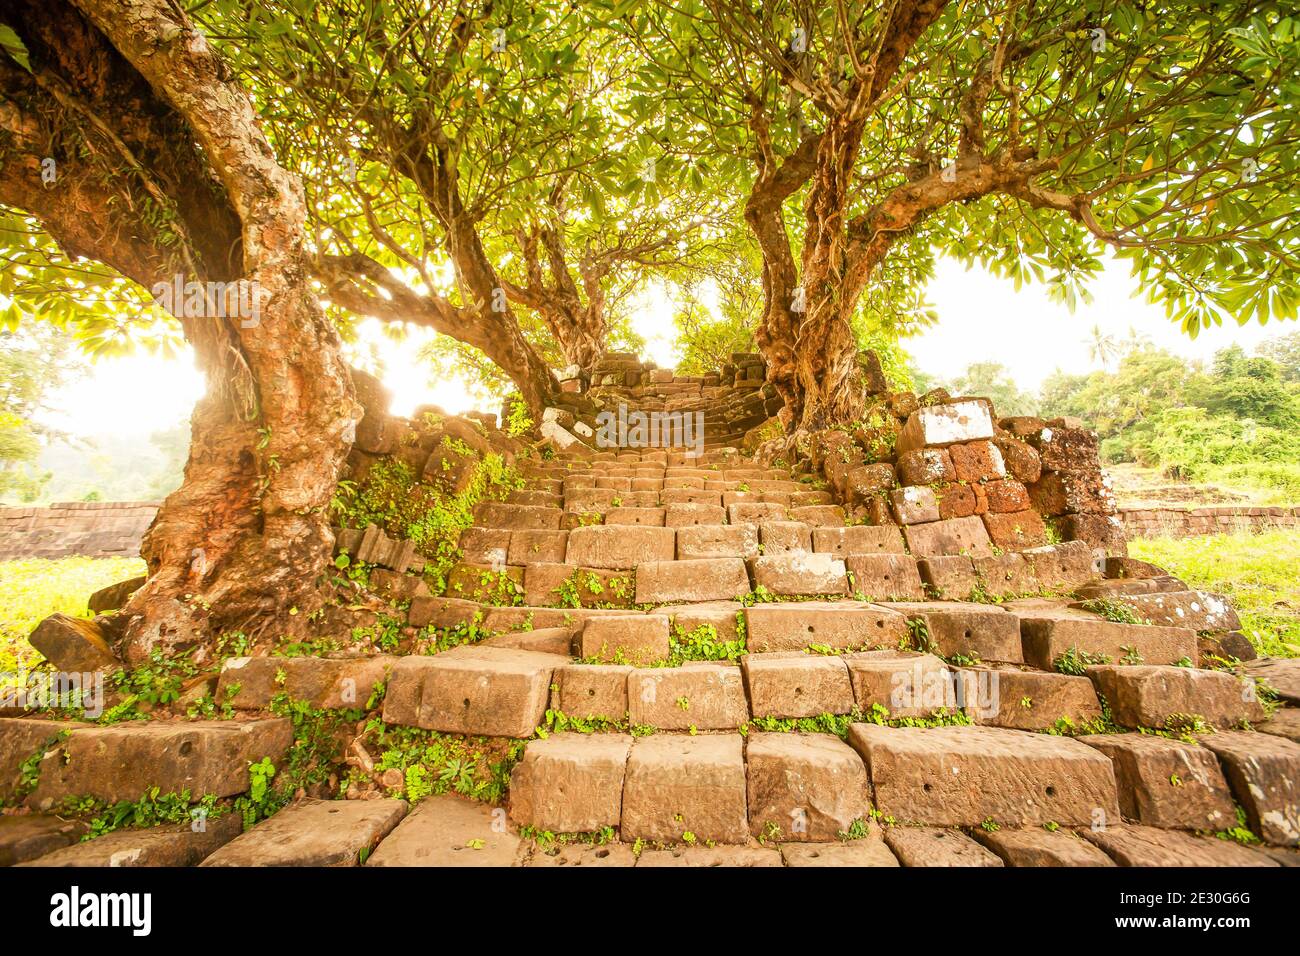 Ancient spiritual stairs and old Plumeria trees to the Vat Phou temple area, Vat Phou is a ruined Khmer Hindu temple complex in Champasak, Laos. Stock Photo